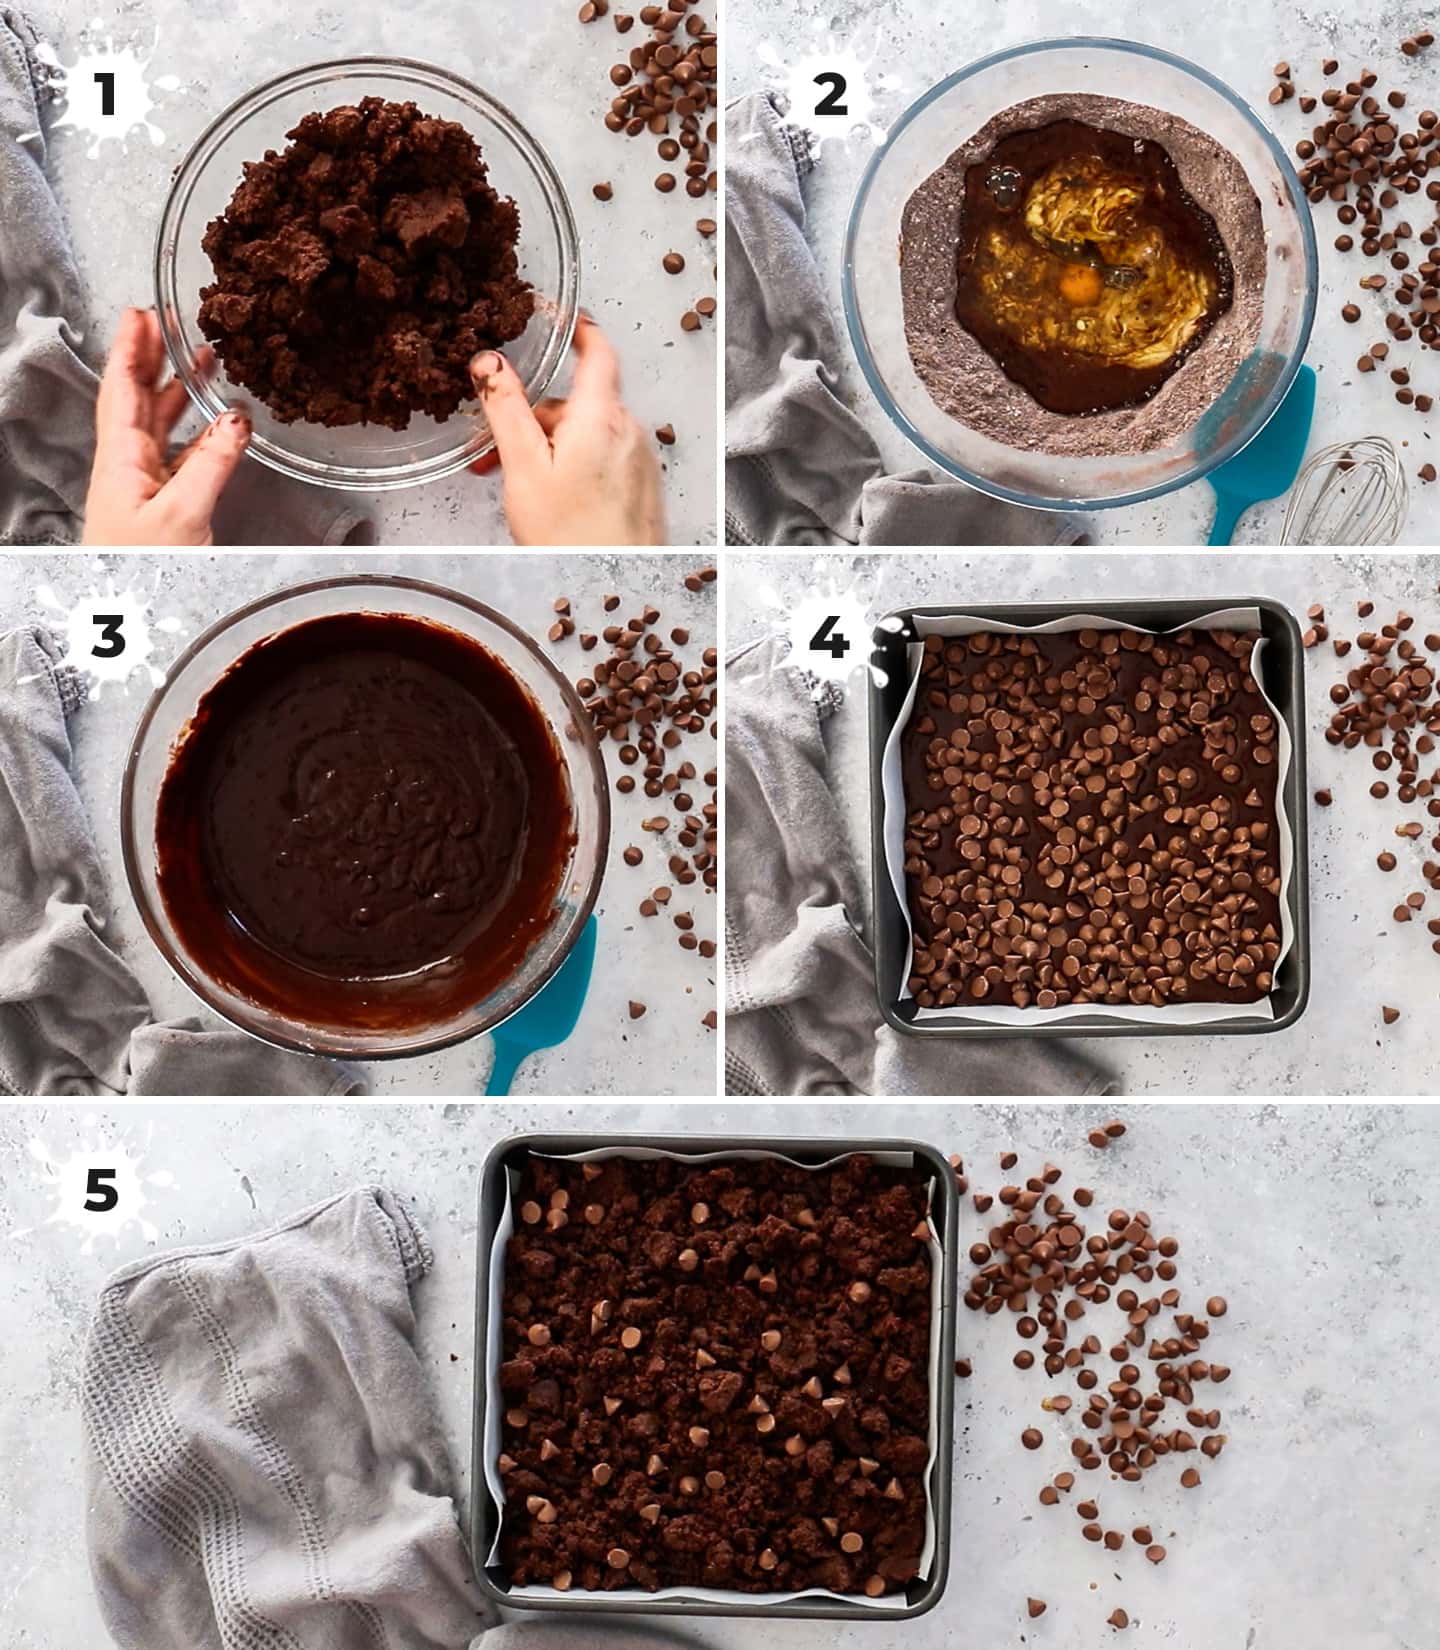 A collage of 5 images showing how to make chocolate crumb cake.